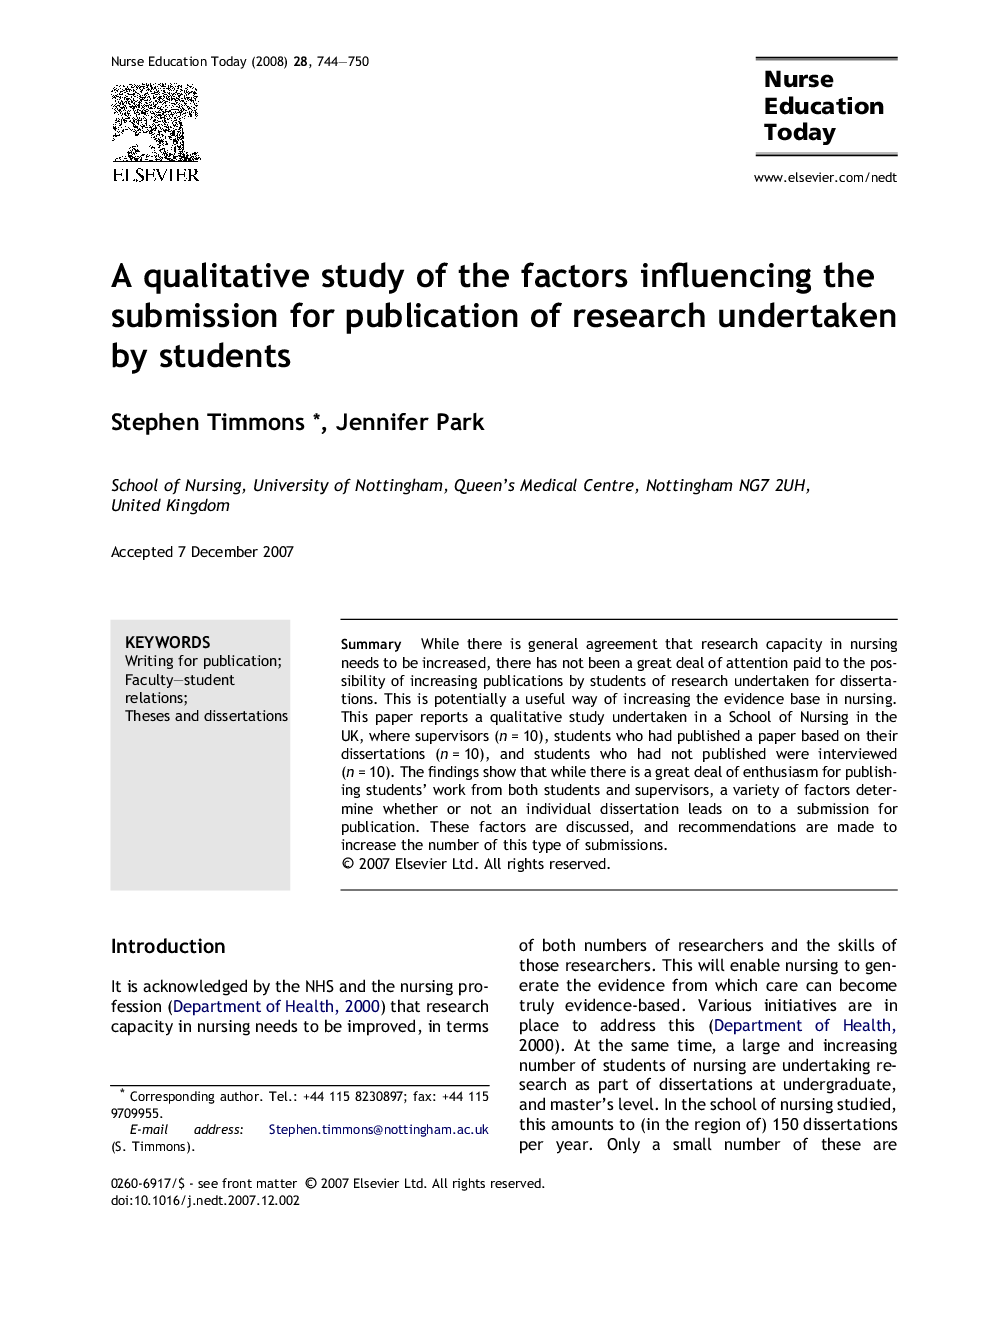 A qualitative study of the factors influencing the submission for publication of research undertaken by students